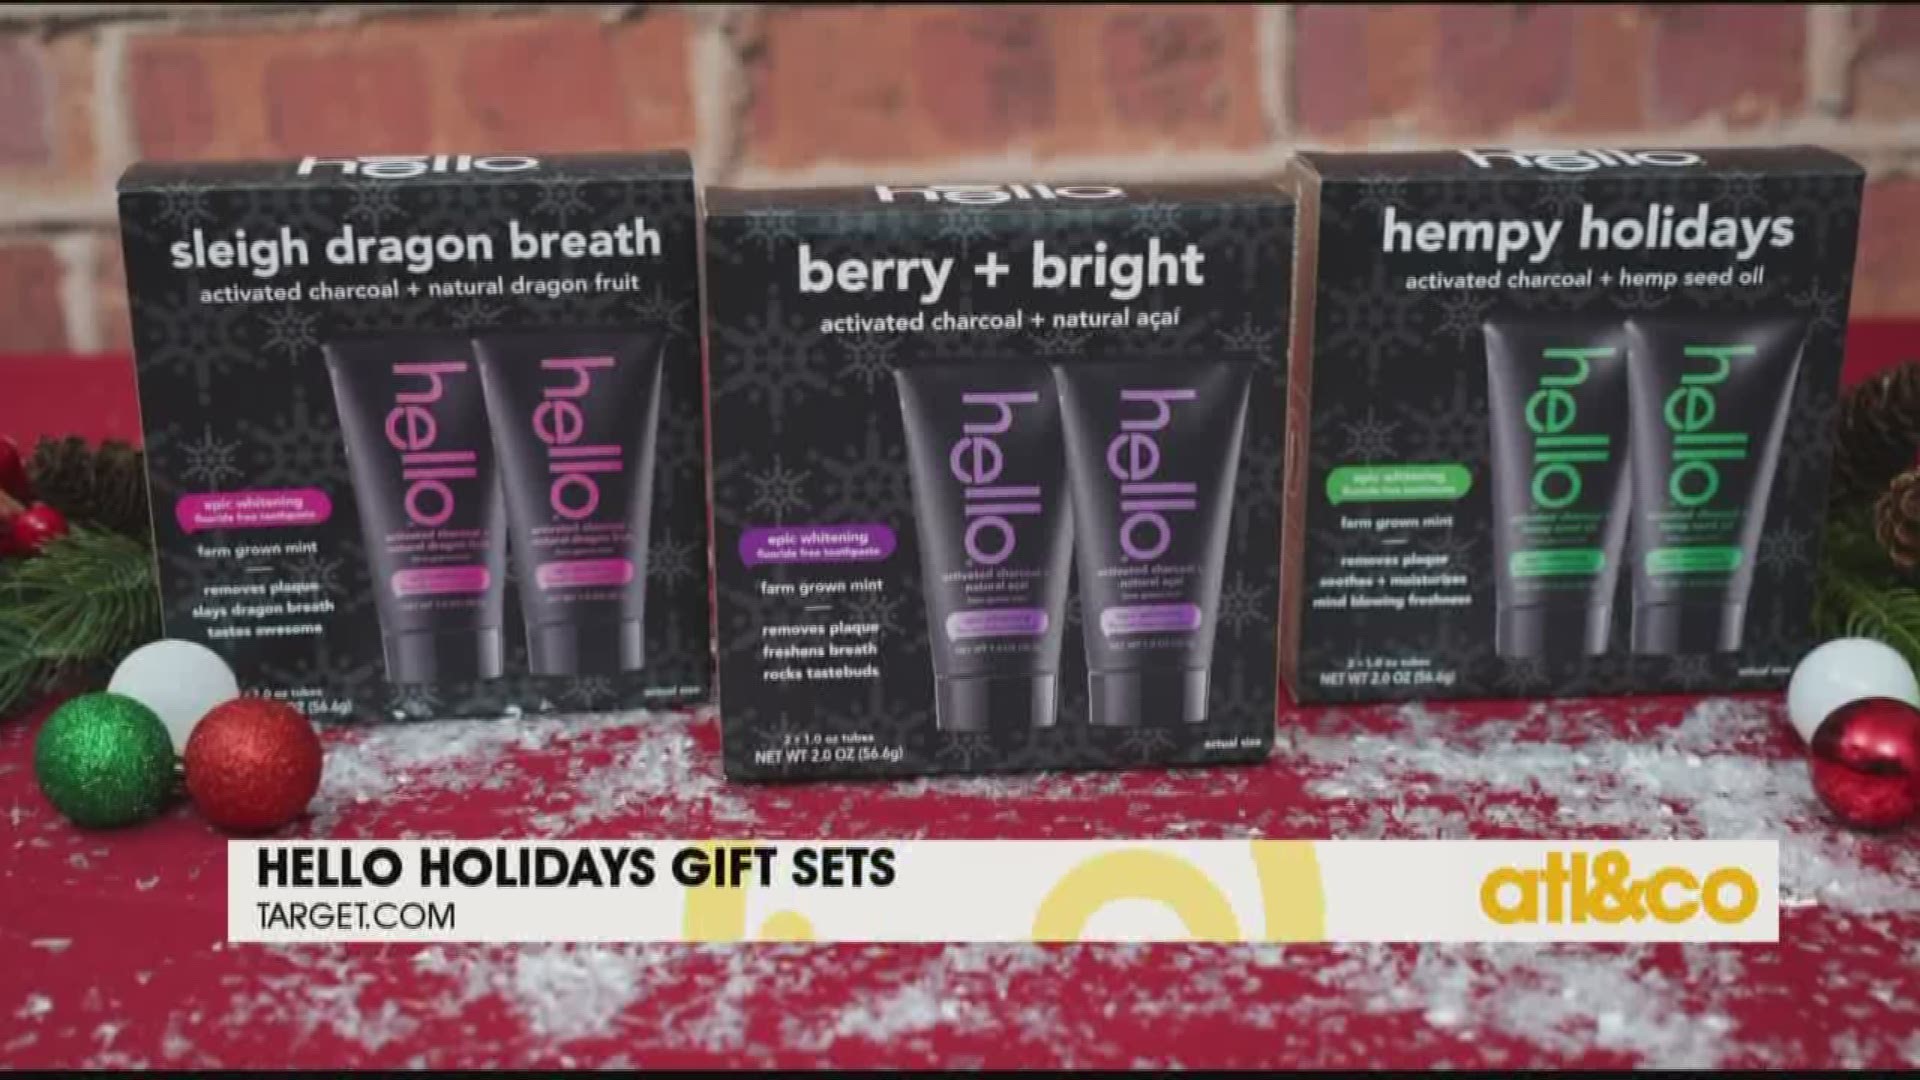 Lifestyle expert Limor Suss shares holiday gifts for the women in your life.